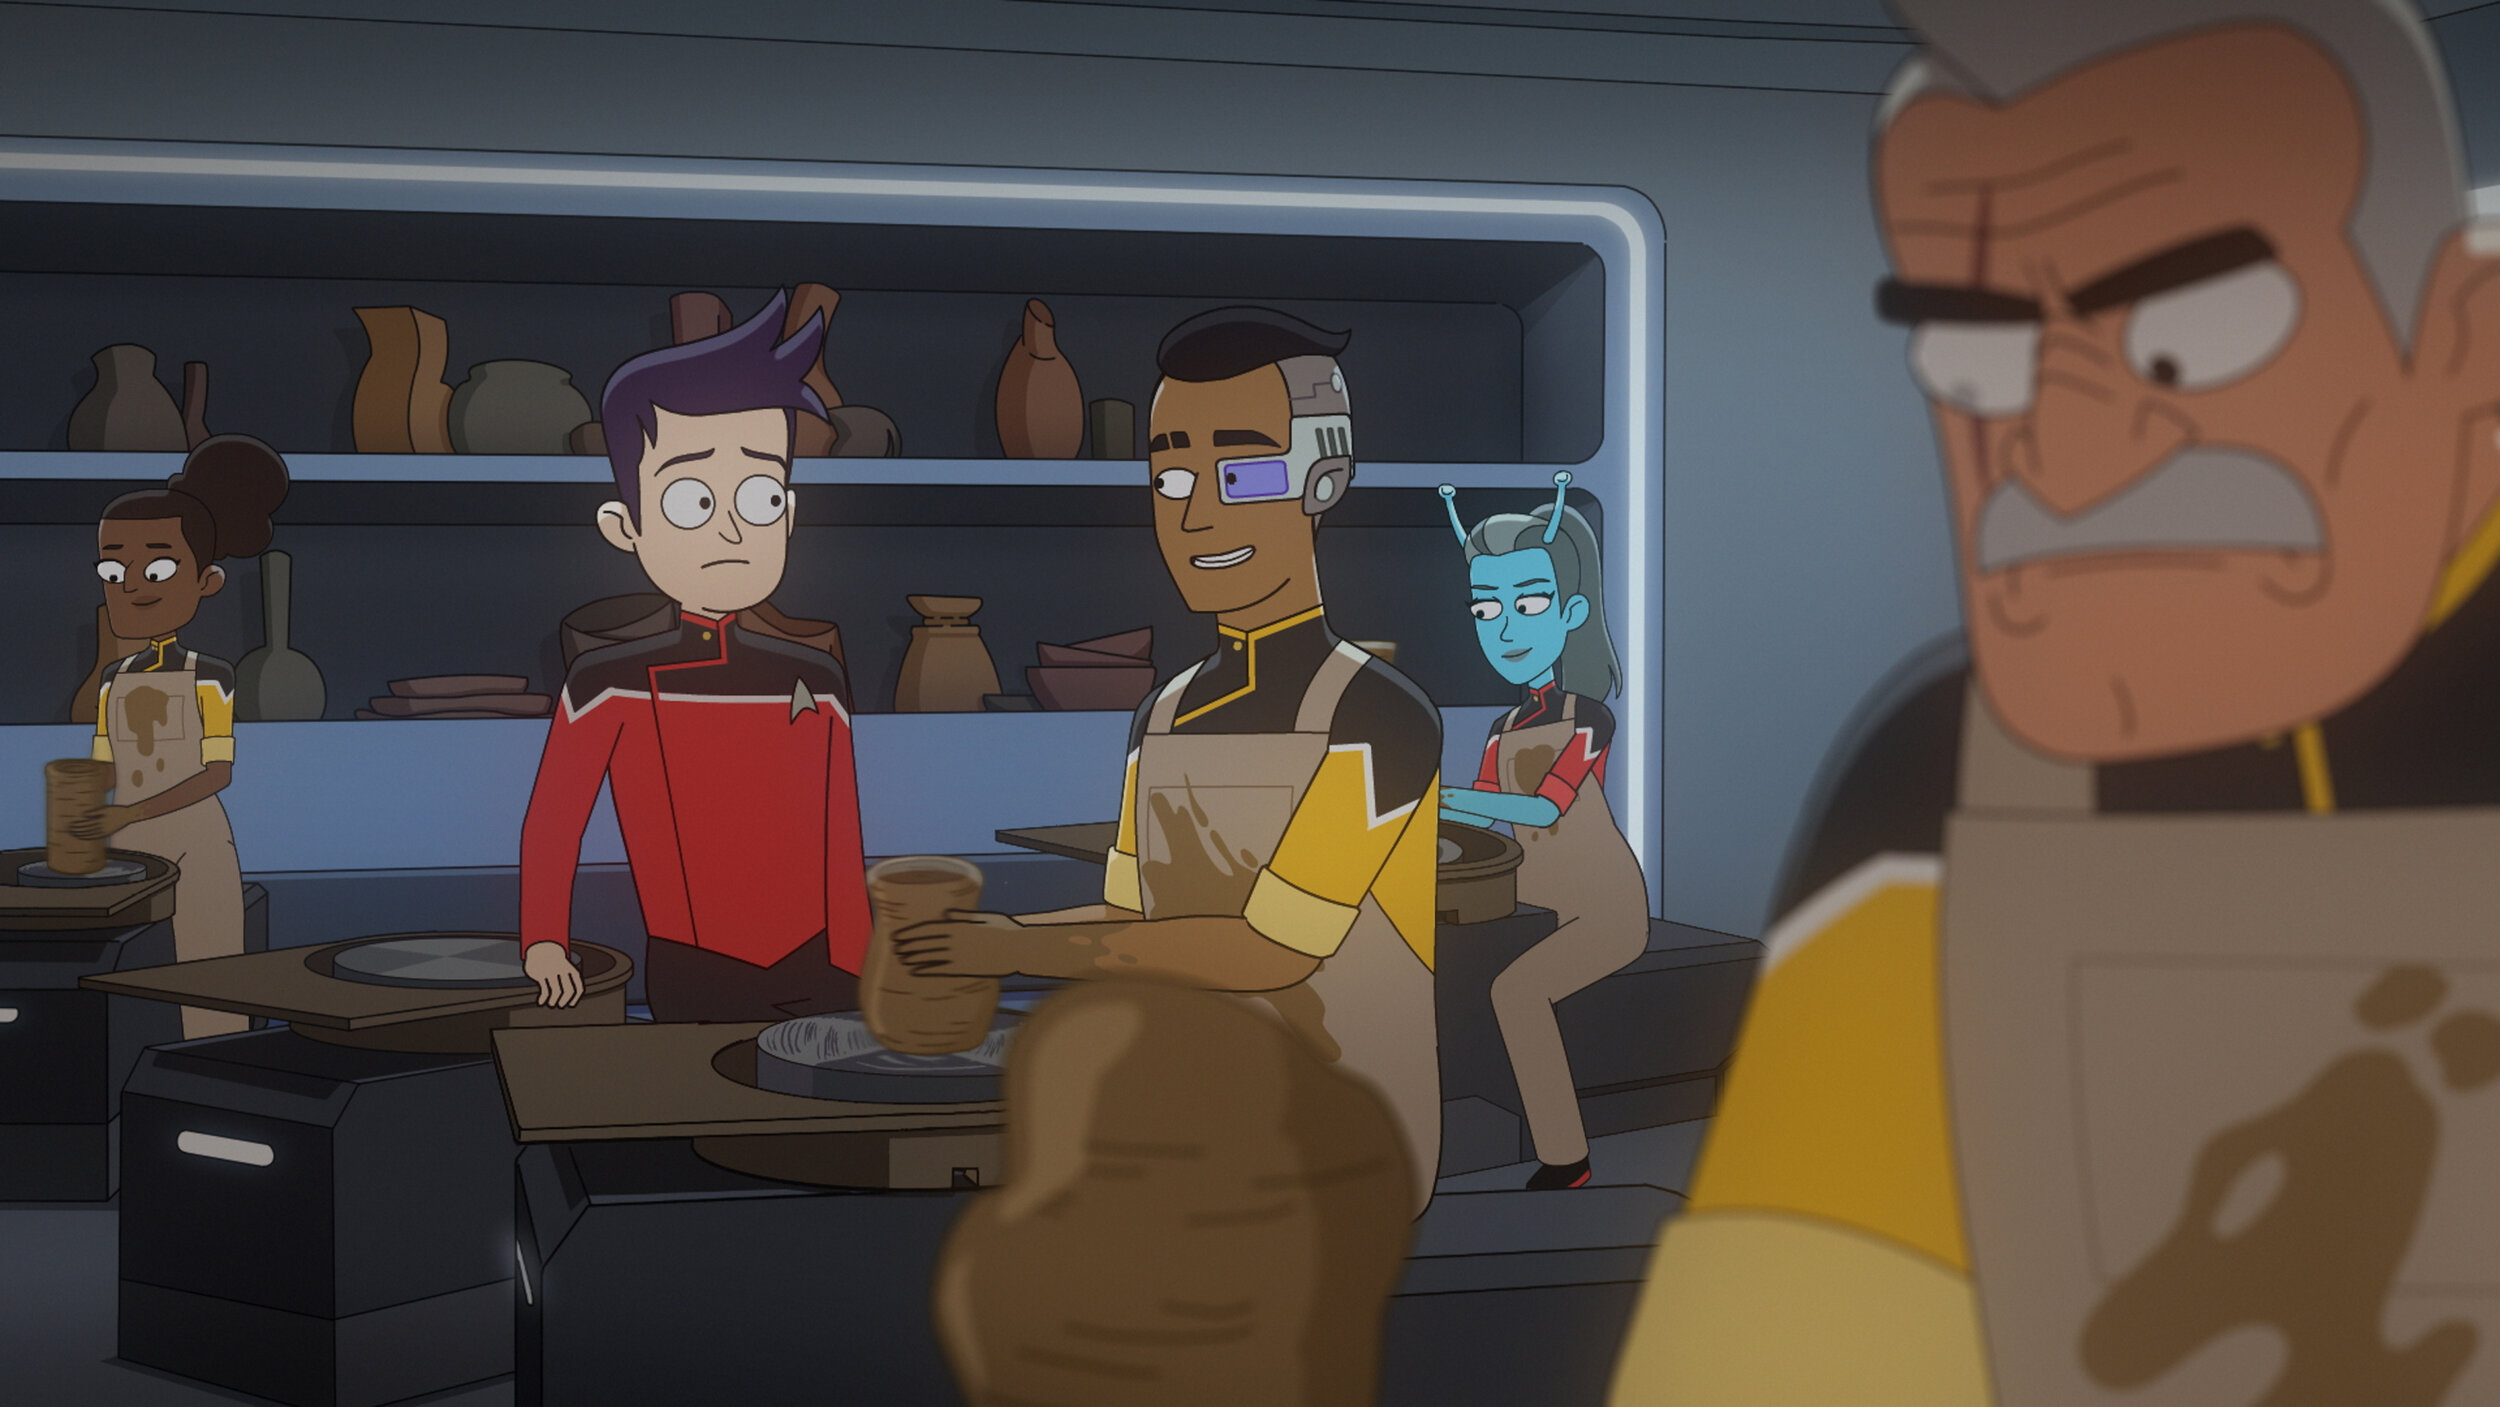   "wej Duj" Ep# 209 -- Jack Quaid as Ensign Brad Boimler, Eugene Cordero as Ensign Rutherford and Fred Tatasciore as Lieutenant Shaxs of the Paramount+ series STAR TREK: LOWER DECKS. Photo: PARAMOUNT+ ©2021 CBS Interactive, Inc. All Rights Reserved *